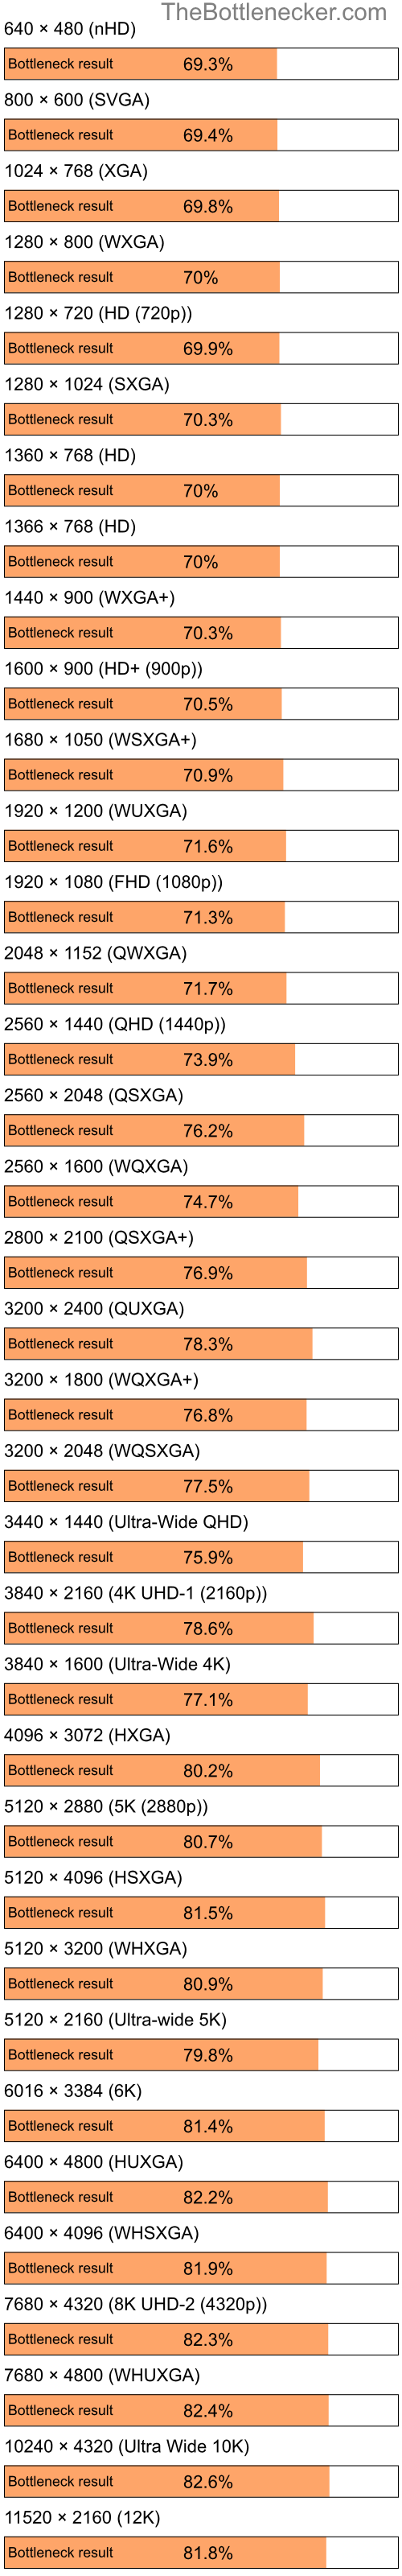 Bottleneck results by resolution for Intel Celeron M and NVIDIA GeForce 9300 GS in Graphic Card Intense Tasks